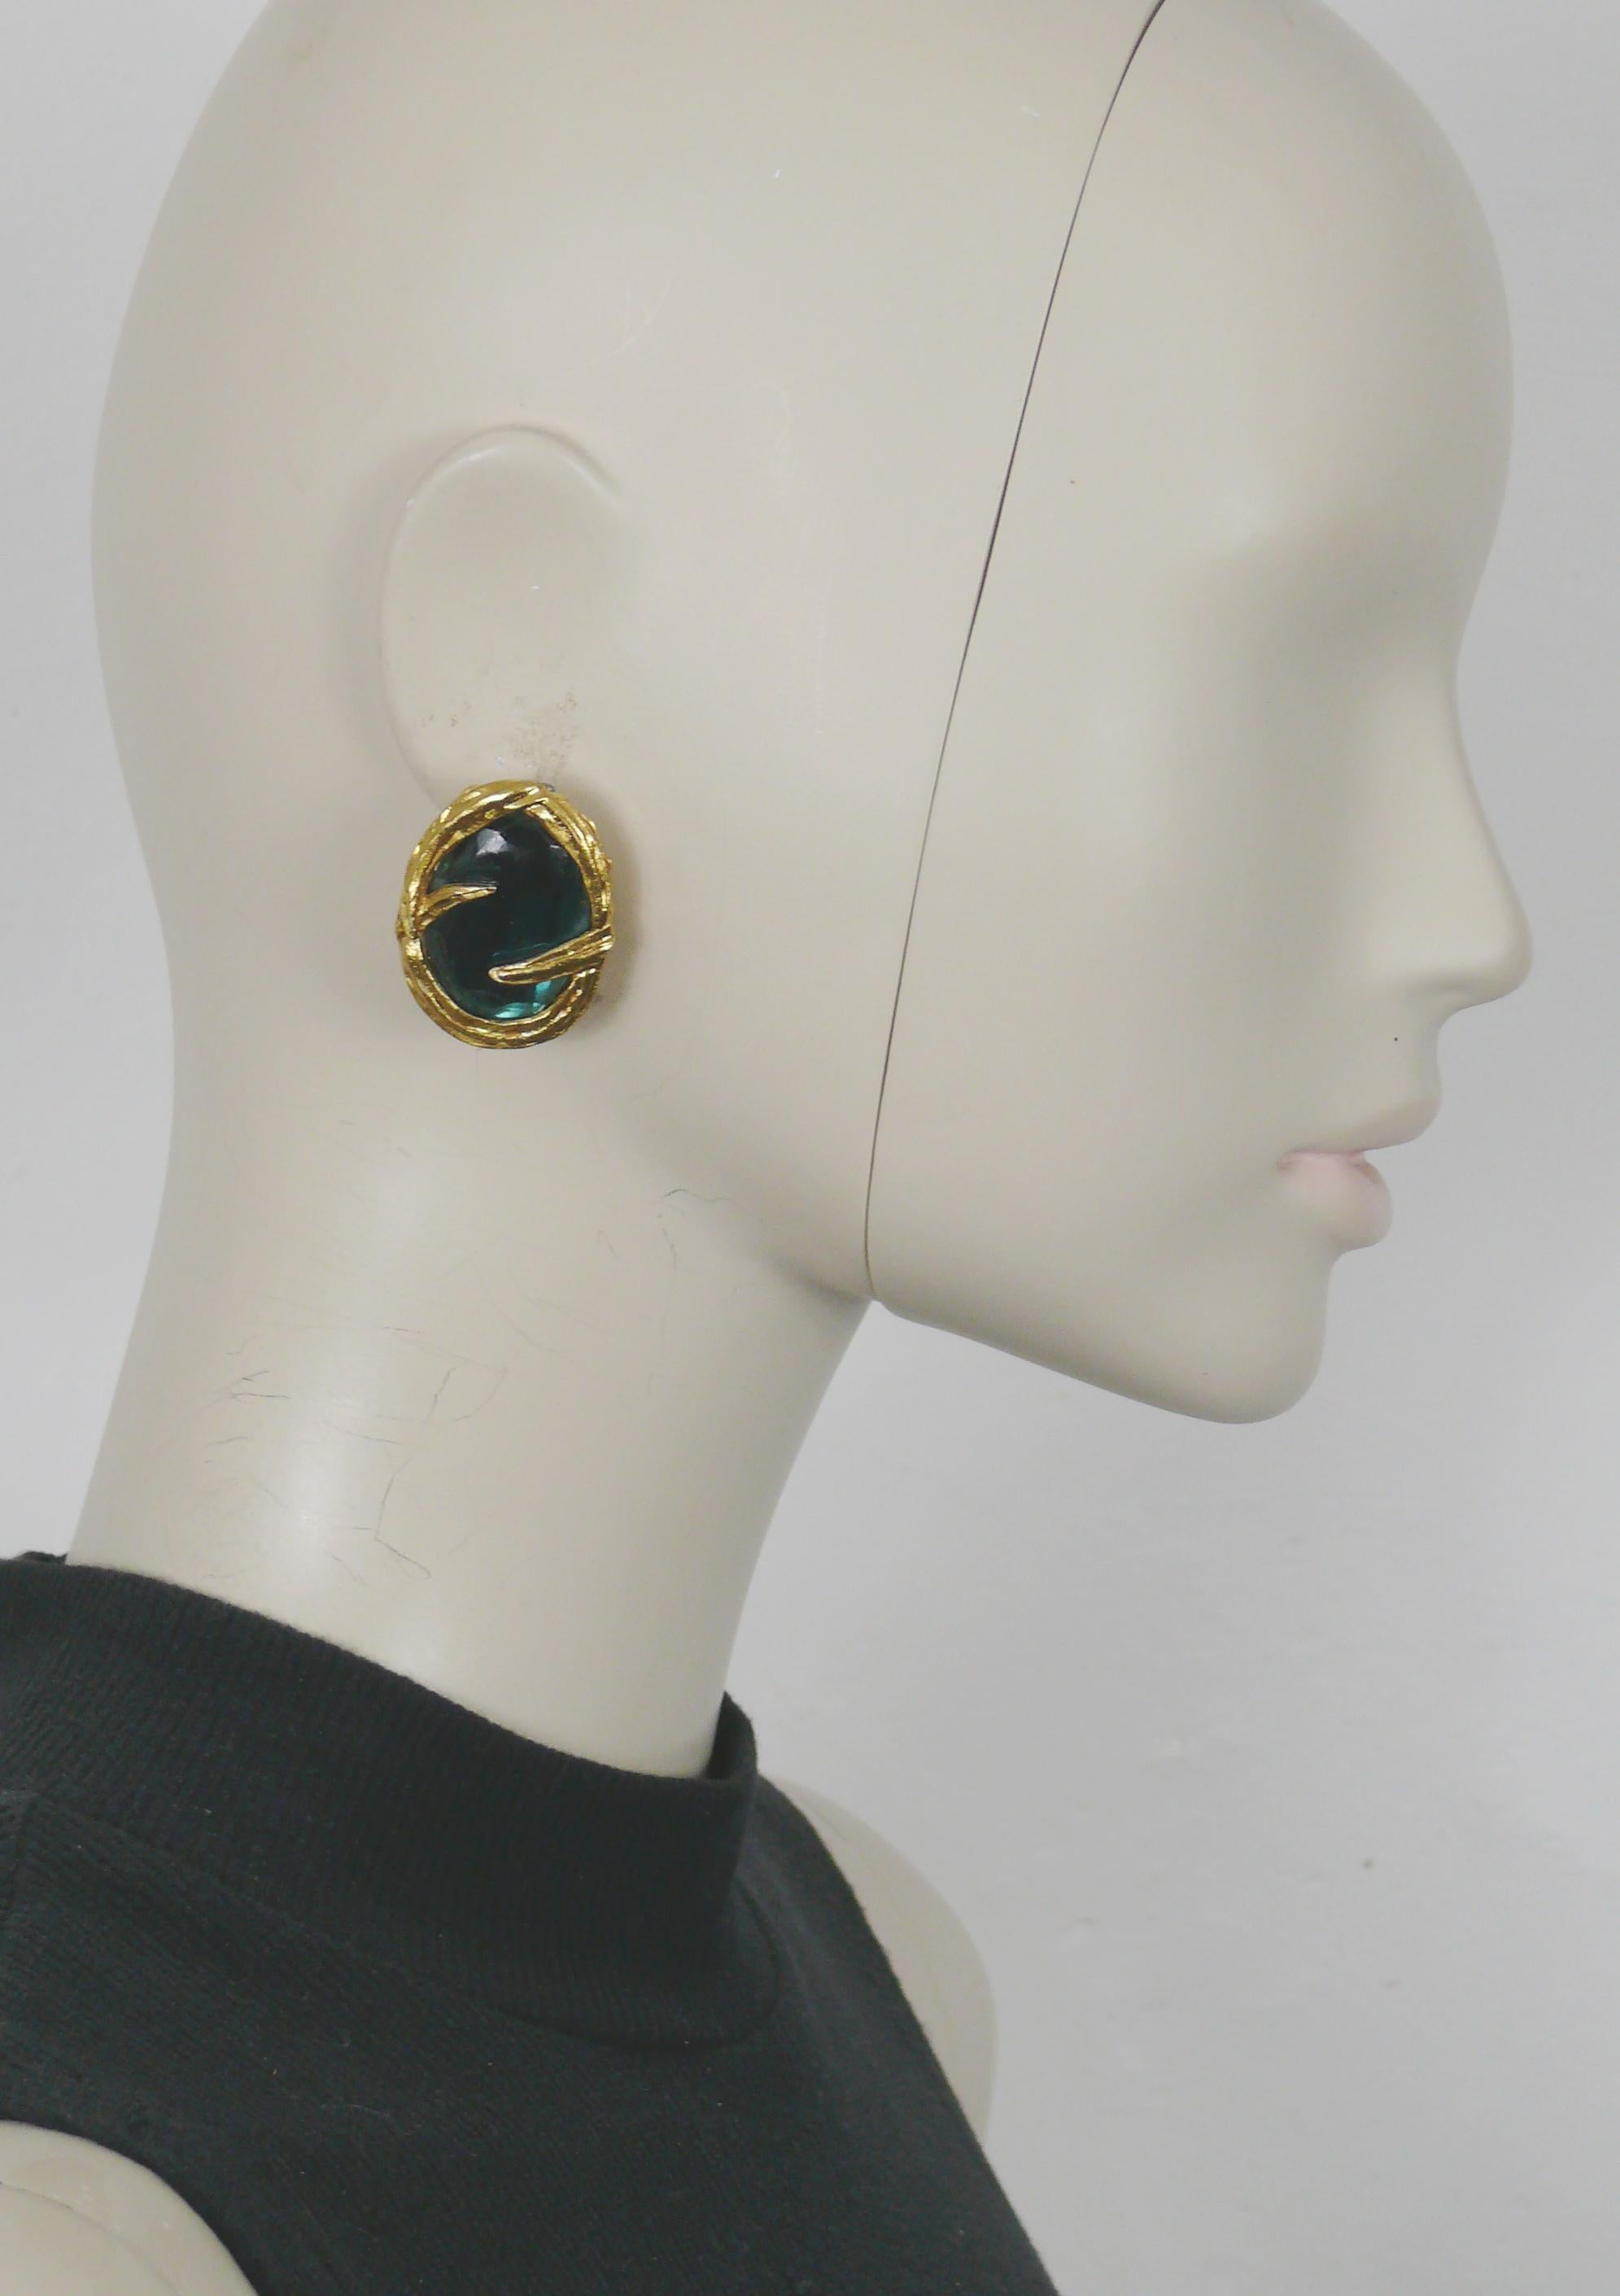 YVES SAINT LAURENT vintage oval-shaped gold toned clip-on earrings embellished with a large irregular facetted blue resin cabochon.

Embossed YSL Made in France.

Indicative measurements : height approx. 3.5 cm (1.38 inches) / max. width approx. 2.5